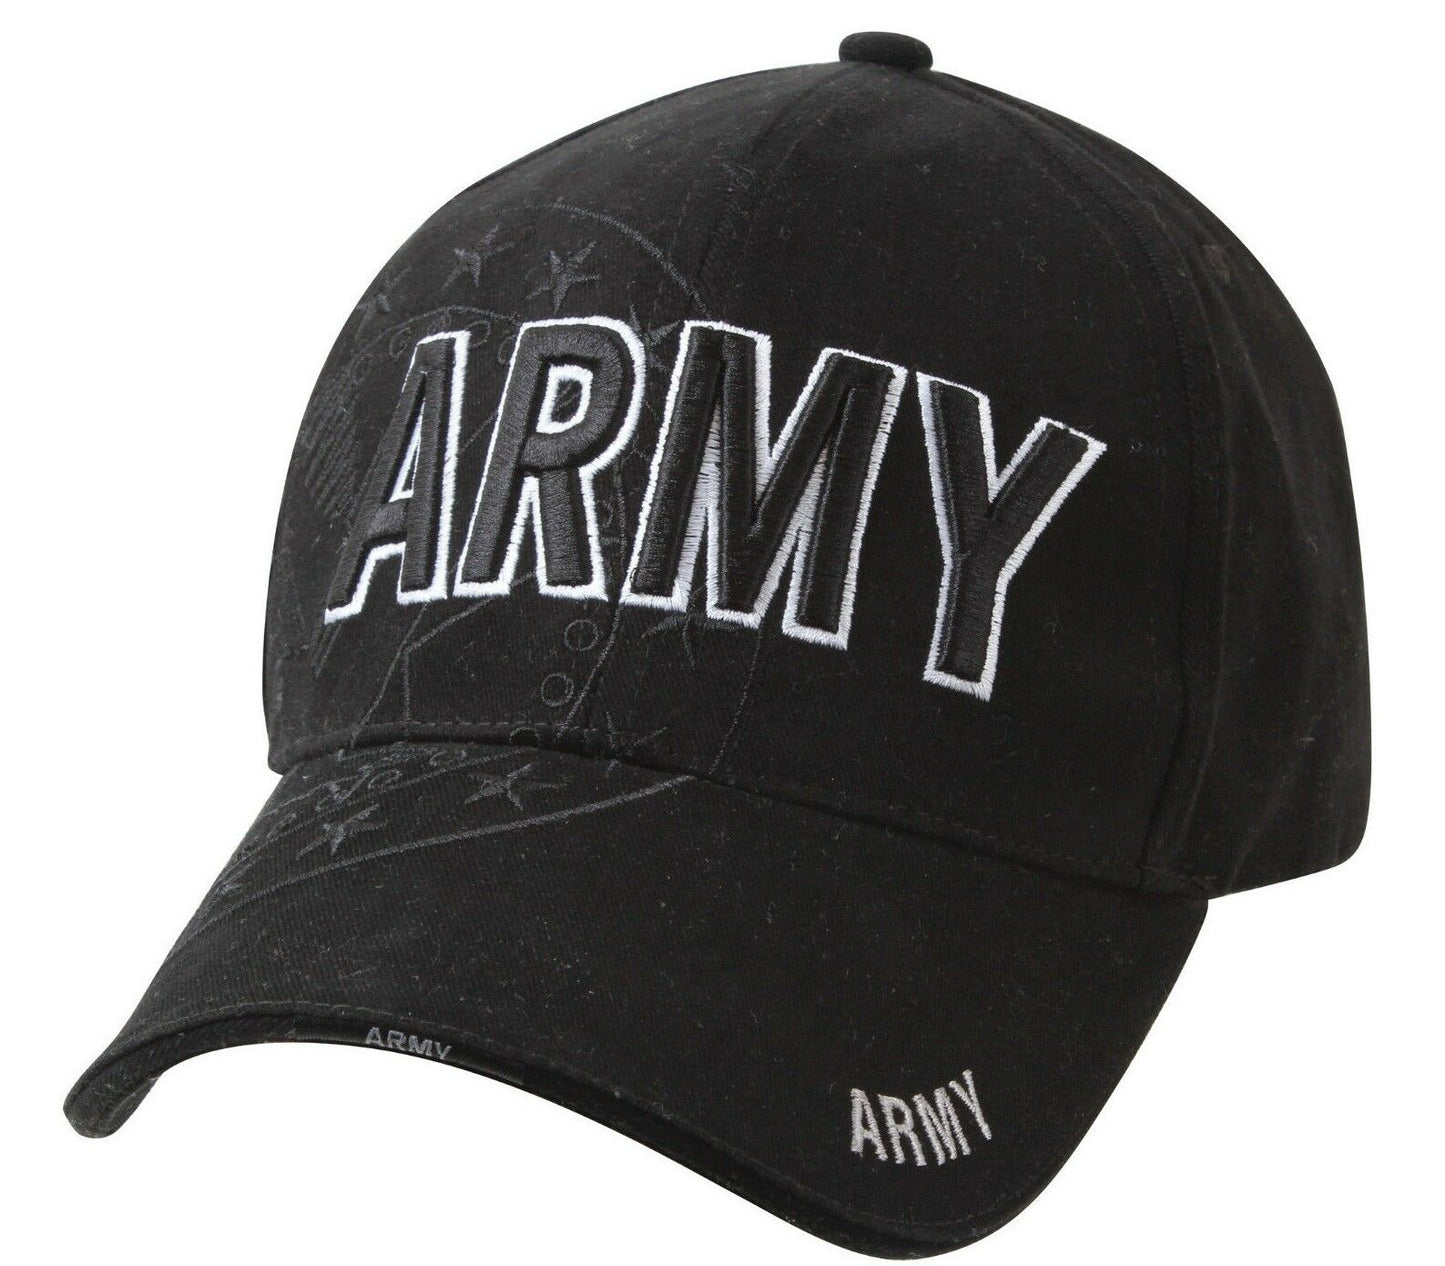 Rothco Deluxe Low Pro Shadow Cap / Army Eagle